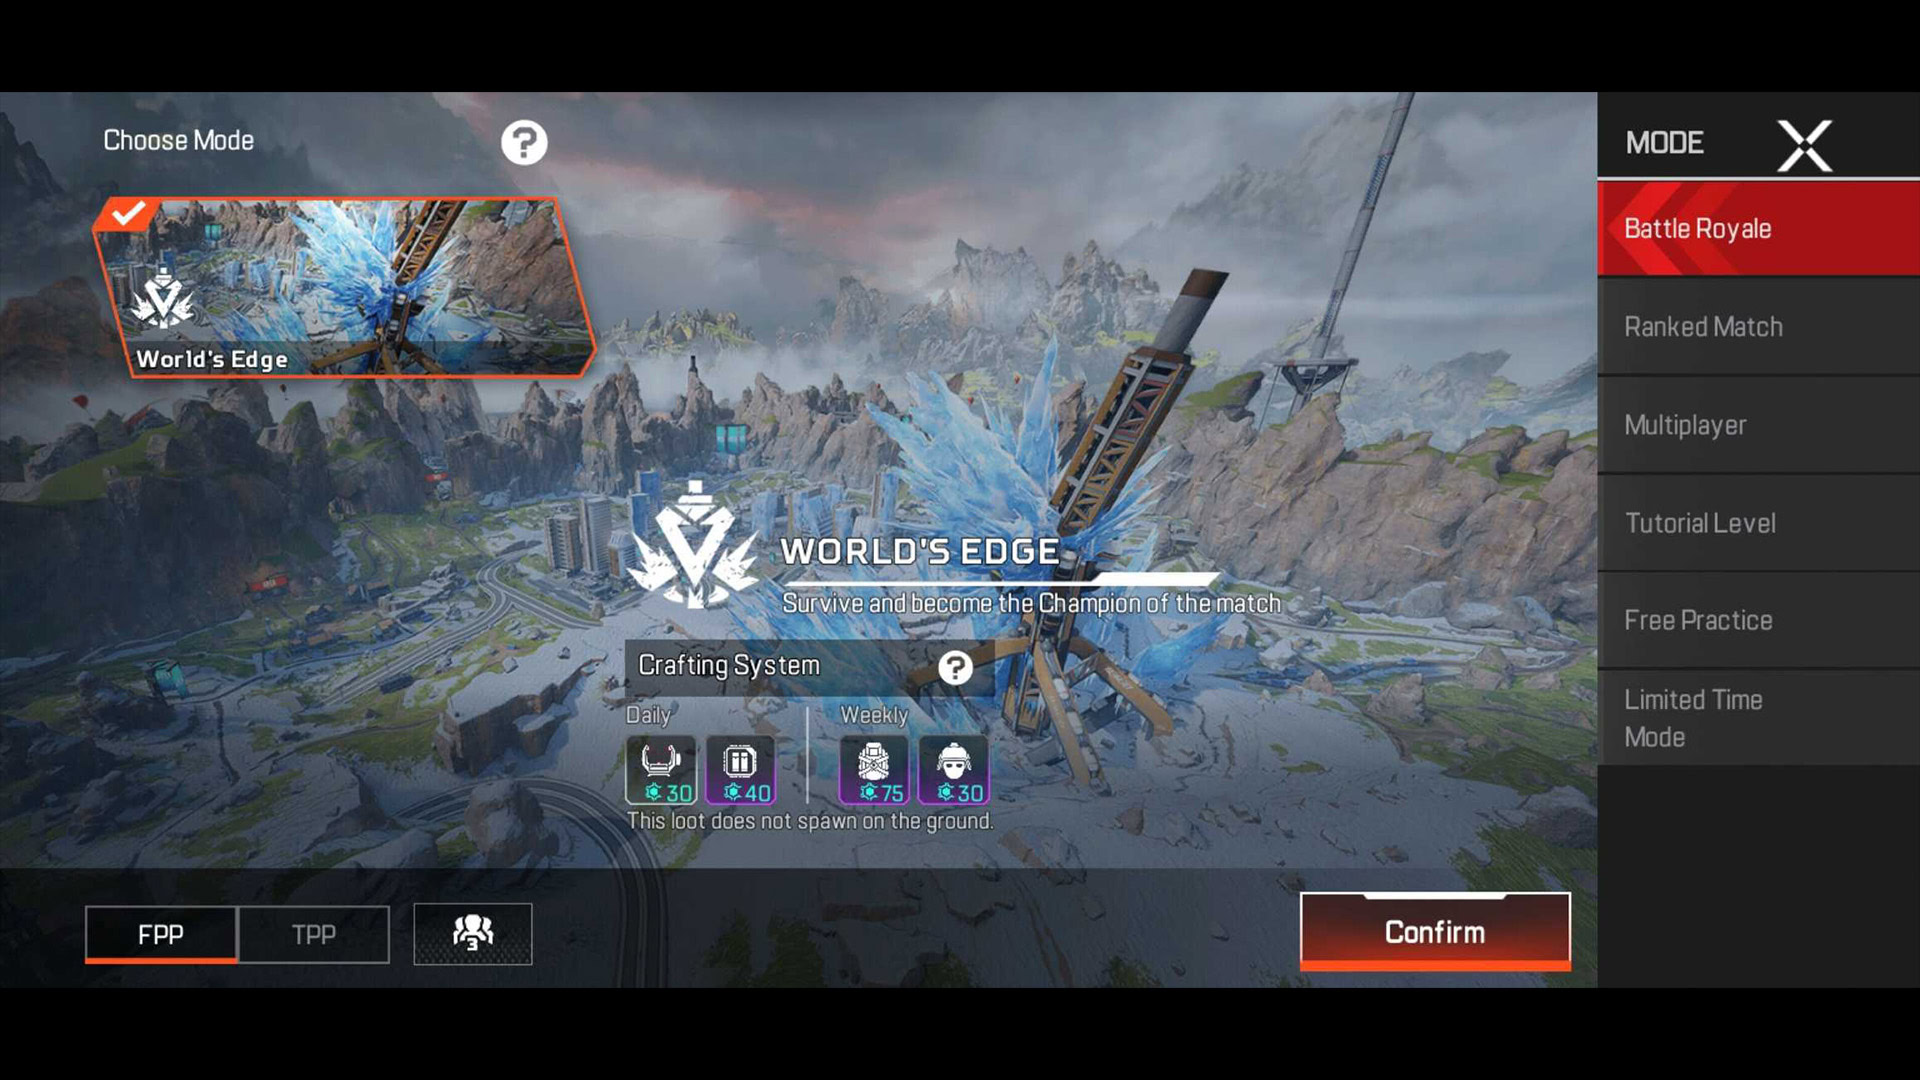 Here is every game mode available in Apex Legends Mobile